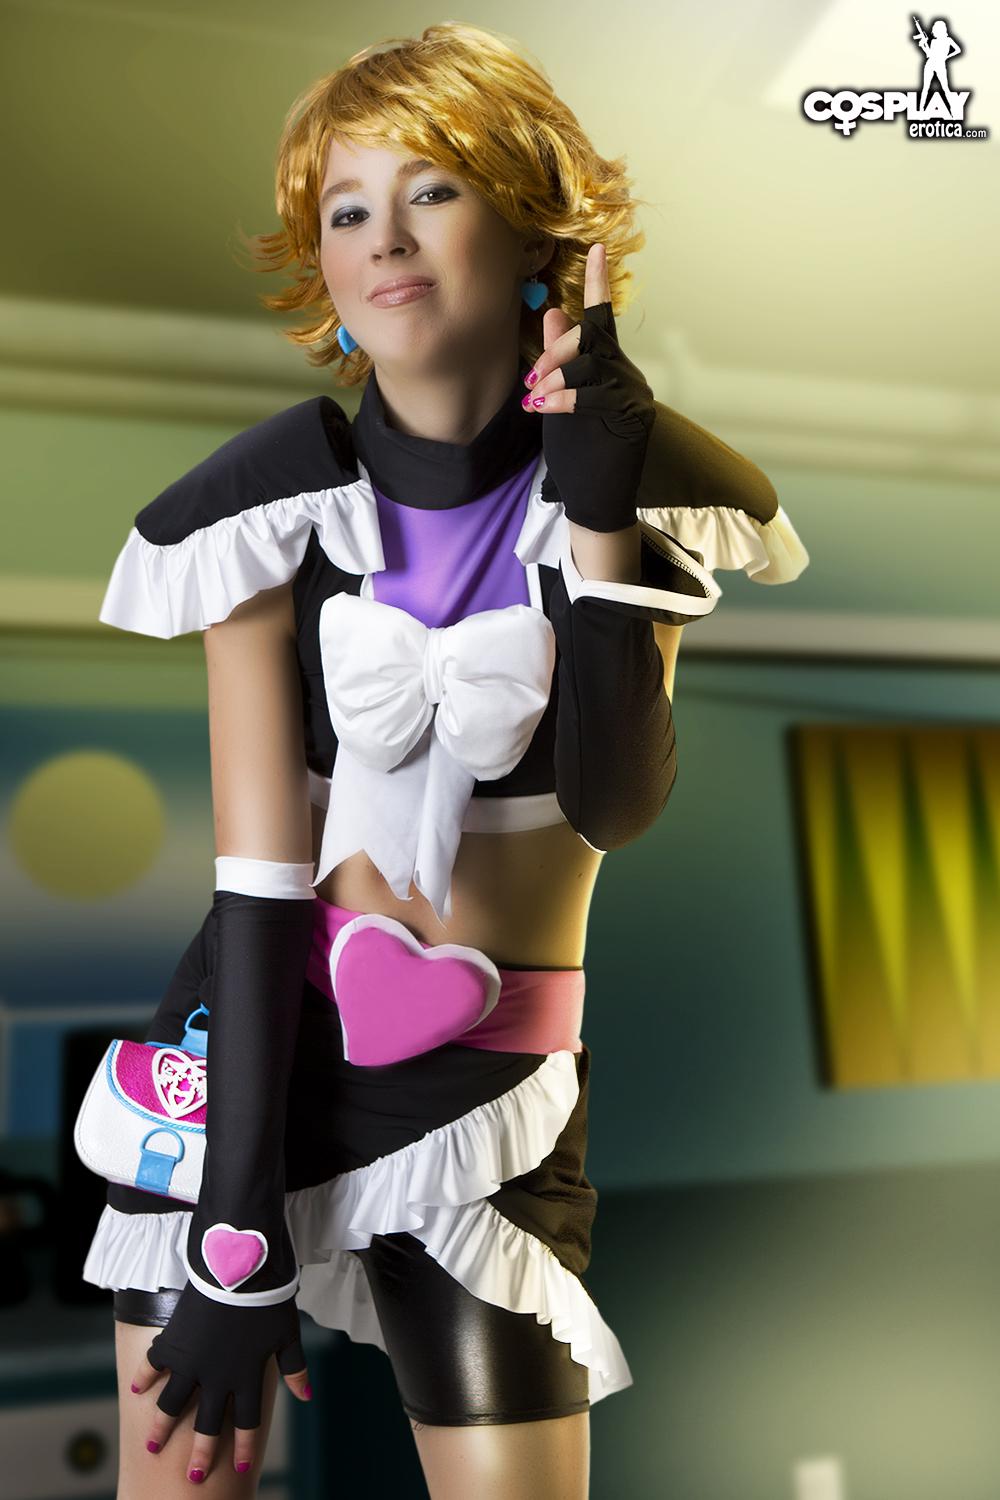 Cosplay hottie stacy strisce in un set anime sexy
 #60007687